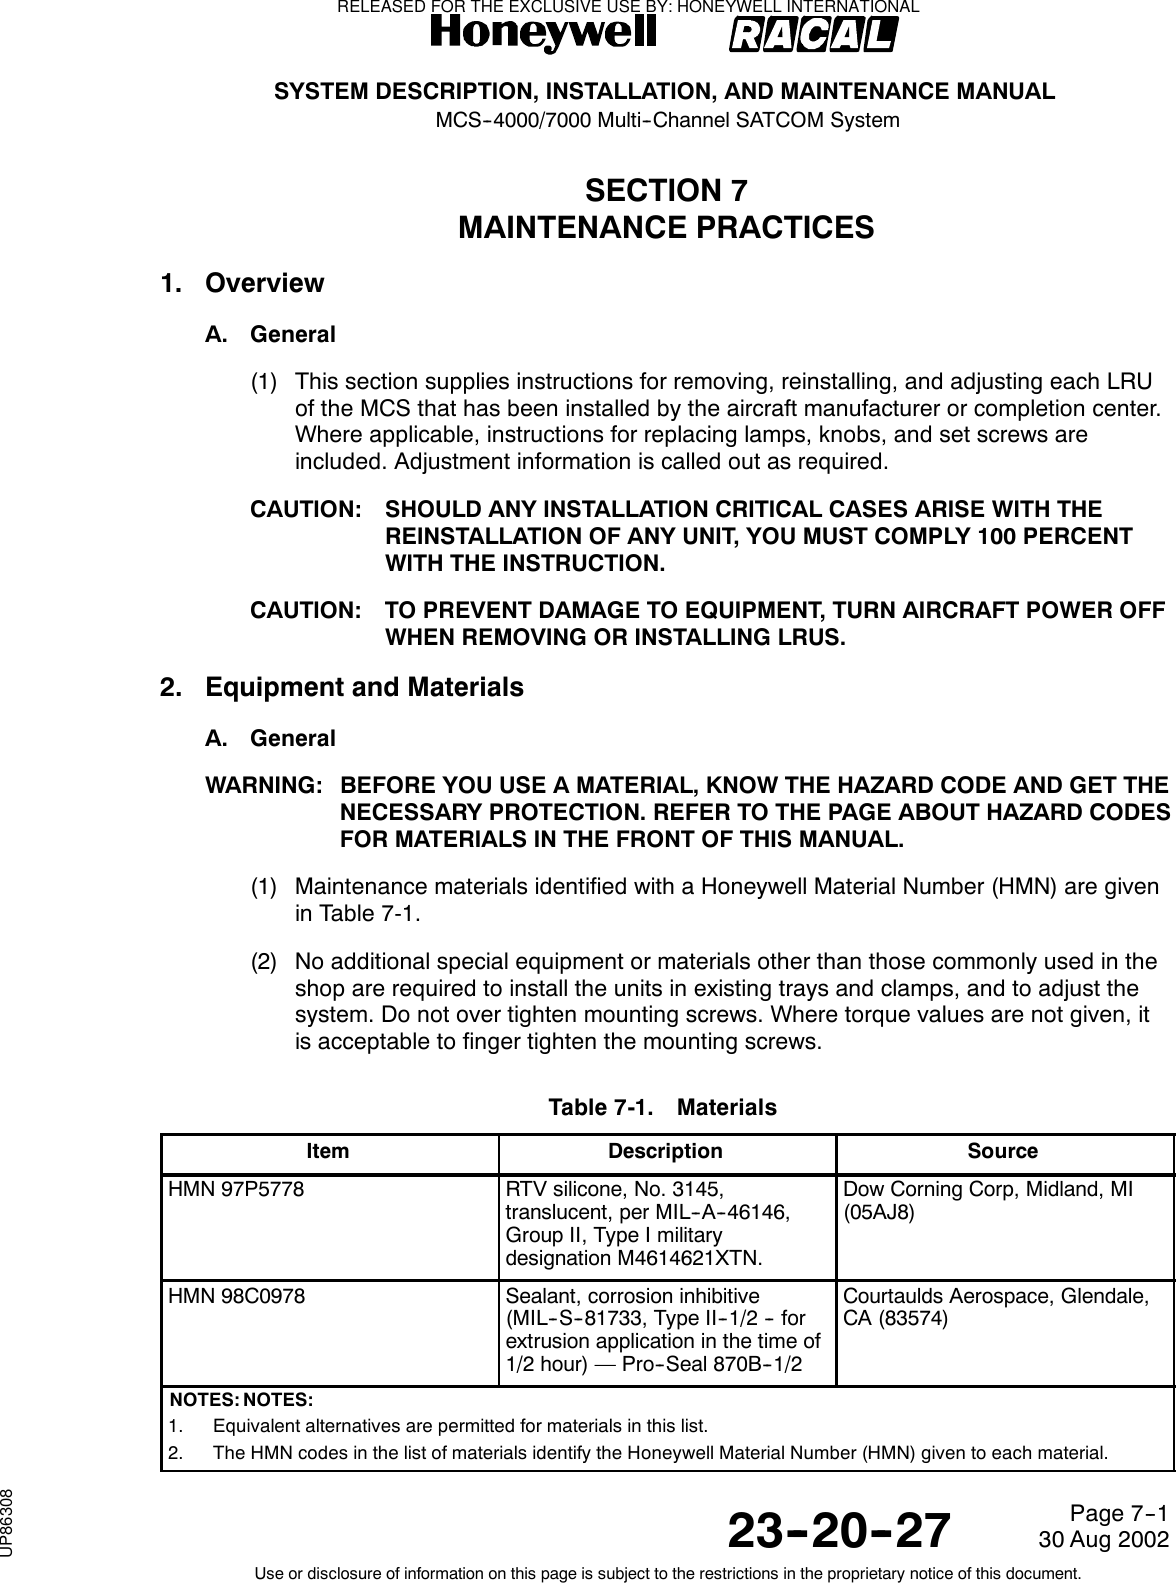 SYSTEM DESCRIPTION, INSTALLATION, AND MAINTENANCE MANUALMCS--4000/7000 Multi--Channel SATCOM System23--20--2730 Aug 2002Use or disclosure of information on this page is subject to the restrictions in the proprietary notice of this document.Page 7--1SECTION 7MAINTENANCE PRACTICES1. OverviewA. General(1) This section supplies instructions for removing, reinstalling, and adjusting each LRUof the MCS that has been installed by the aircraft manufacturer or completion center.Where applicable, instructions for replacing lamps, knobs, and set screws areincluded. Adjustment information is called out as required.CAUTION: SHOULD ANY INSTALLATION CRITICAL CASES ARISE WITH THEREINSTALLATION OF ANY UNIT, YOU MUST COMPLY 100 PERCENTWITH THE INSTRUCTION.CAUTION: TO PREVENT DAMAGE TO EQUIPMENT, TURN AIRCRAFT POWER OFFWHEN REMOVING OR INSTALLING LRUS.2. Equipment and MaterialsA. GeneralWARNING: BEFORE YOU USE A MATERIAL, KNOW THE HAZARD CODE AND GET THENECESSARY PROTECTION. REFER TO THE PAGE ABOUT HAZARD CODESFOR MATERIALS IN THE FRONT OF THIS MANUAL.(1) Maintenance materials identified with a Honeywell Material Number (HMN) are givenin Table 7-1.(2) No additional special equipment or materials other than those commonly used in theshop are required to install the units in existing trays and clamps, and to adjust thesystem. Do not over tighten mounting screws. Where torque values are not given, itis acceptable to finger tighten the mounting screws.Table 7-1. MaterialsItem Description SourceHMN 97P5778 RTV silicone, No. 3145,translucent, per MIL--A--46146,Group II, Type I militarydesignation M4614621XTN.Dow Corning Corp, Midland, MI(05AJ8)HMN 98C0978 Sealant, corrosion inhibitive(MIL--S--81733, Type II--1/2 -- forextrusion application in the time of1/2 hour) — Pro--Seal 870B--1/2Courtaulds Aerospace, Glendale,CA (83574)NOTES: NOTES:1. Equivalent alternatives are permitted for materials in this list.2. The HMN codes in the list of materials identify the Honeywell Material Number (HMN) given to each material.RELEASED FOR THE EXCLUSIVE USE BY: HONEYWELL INTERNATIONALUP86308